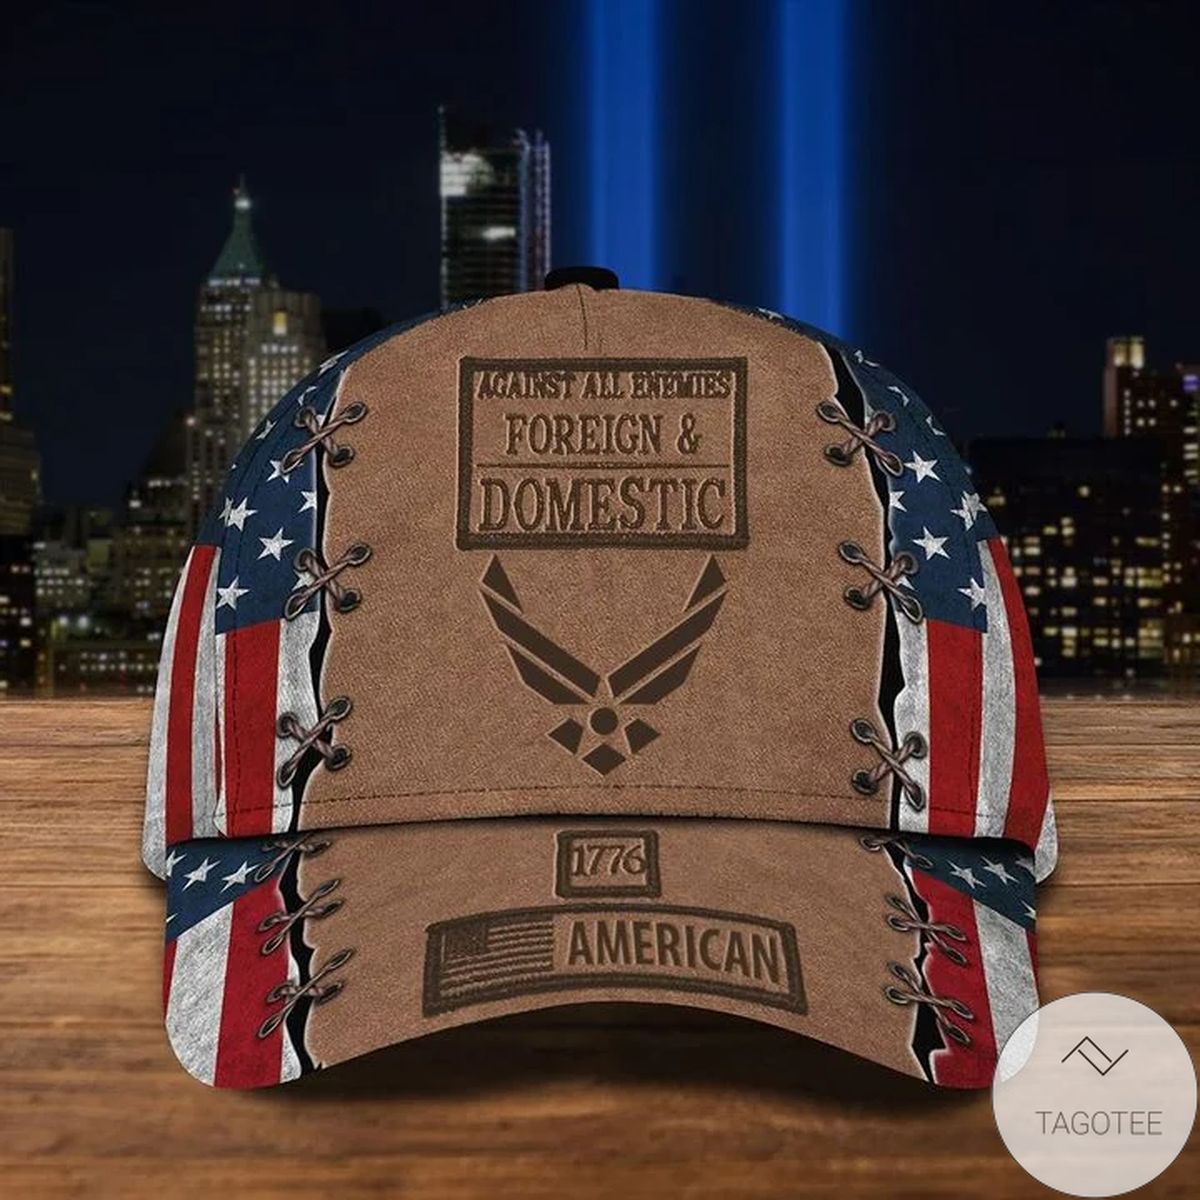 Air Force Ball Cap 1776 American Against All Enemies Foreign Domestic Air Force Retirement Gift